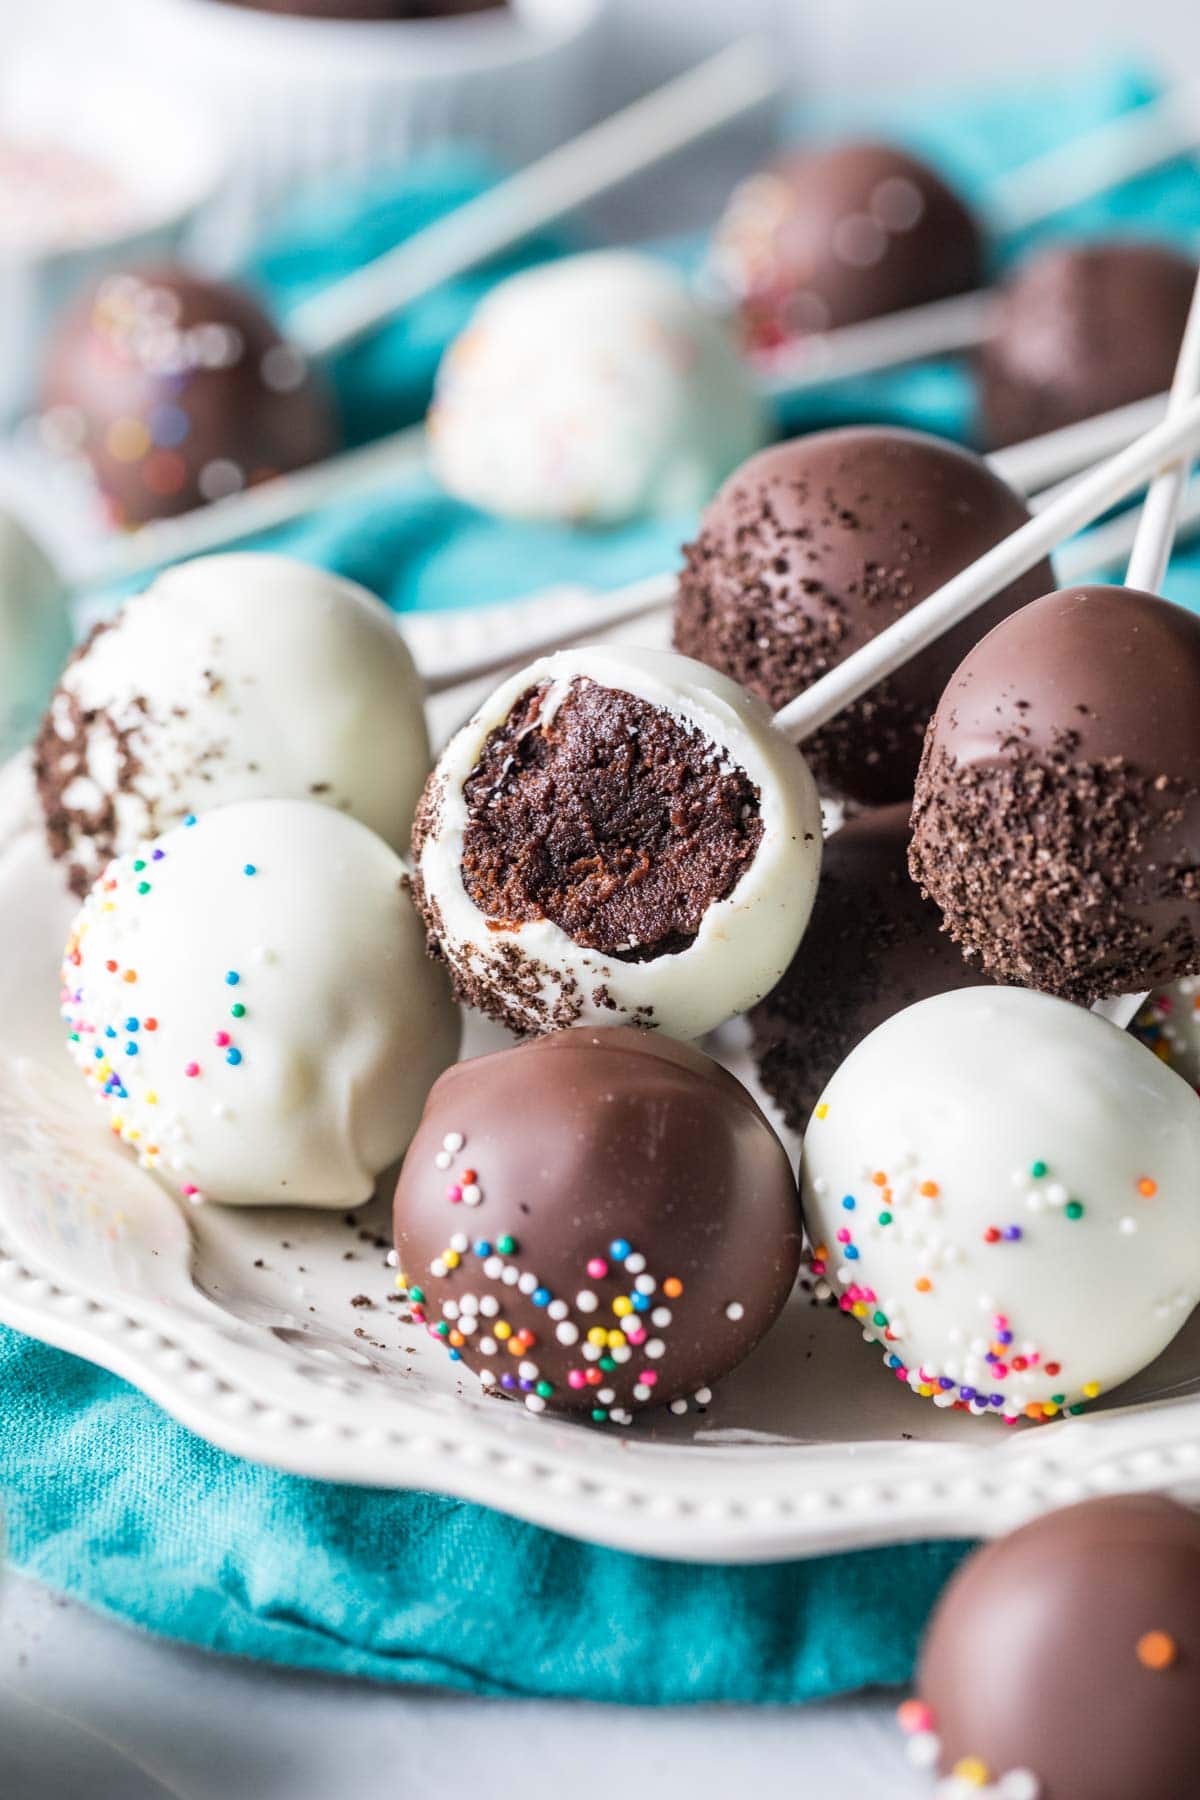 White and dark chocolate coated chocolate cake pops on a plate, with the middle pop missing a bite.